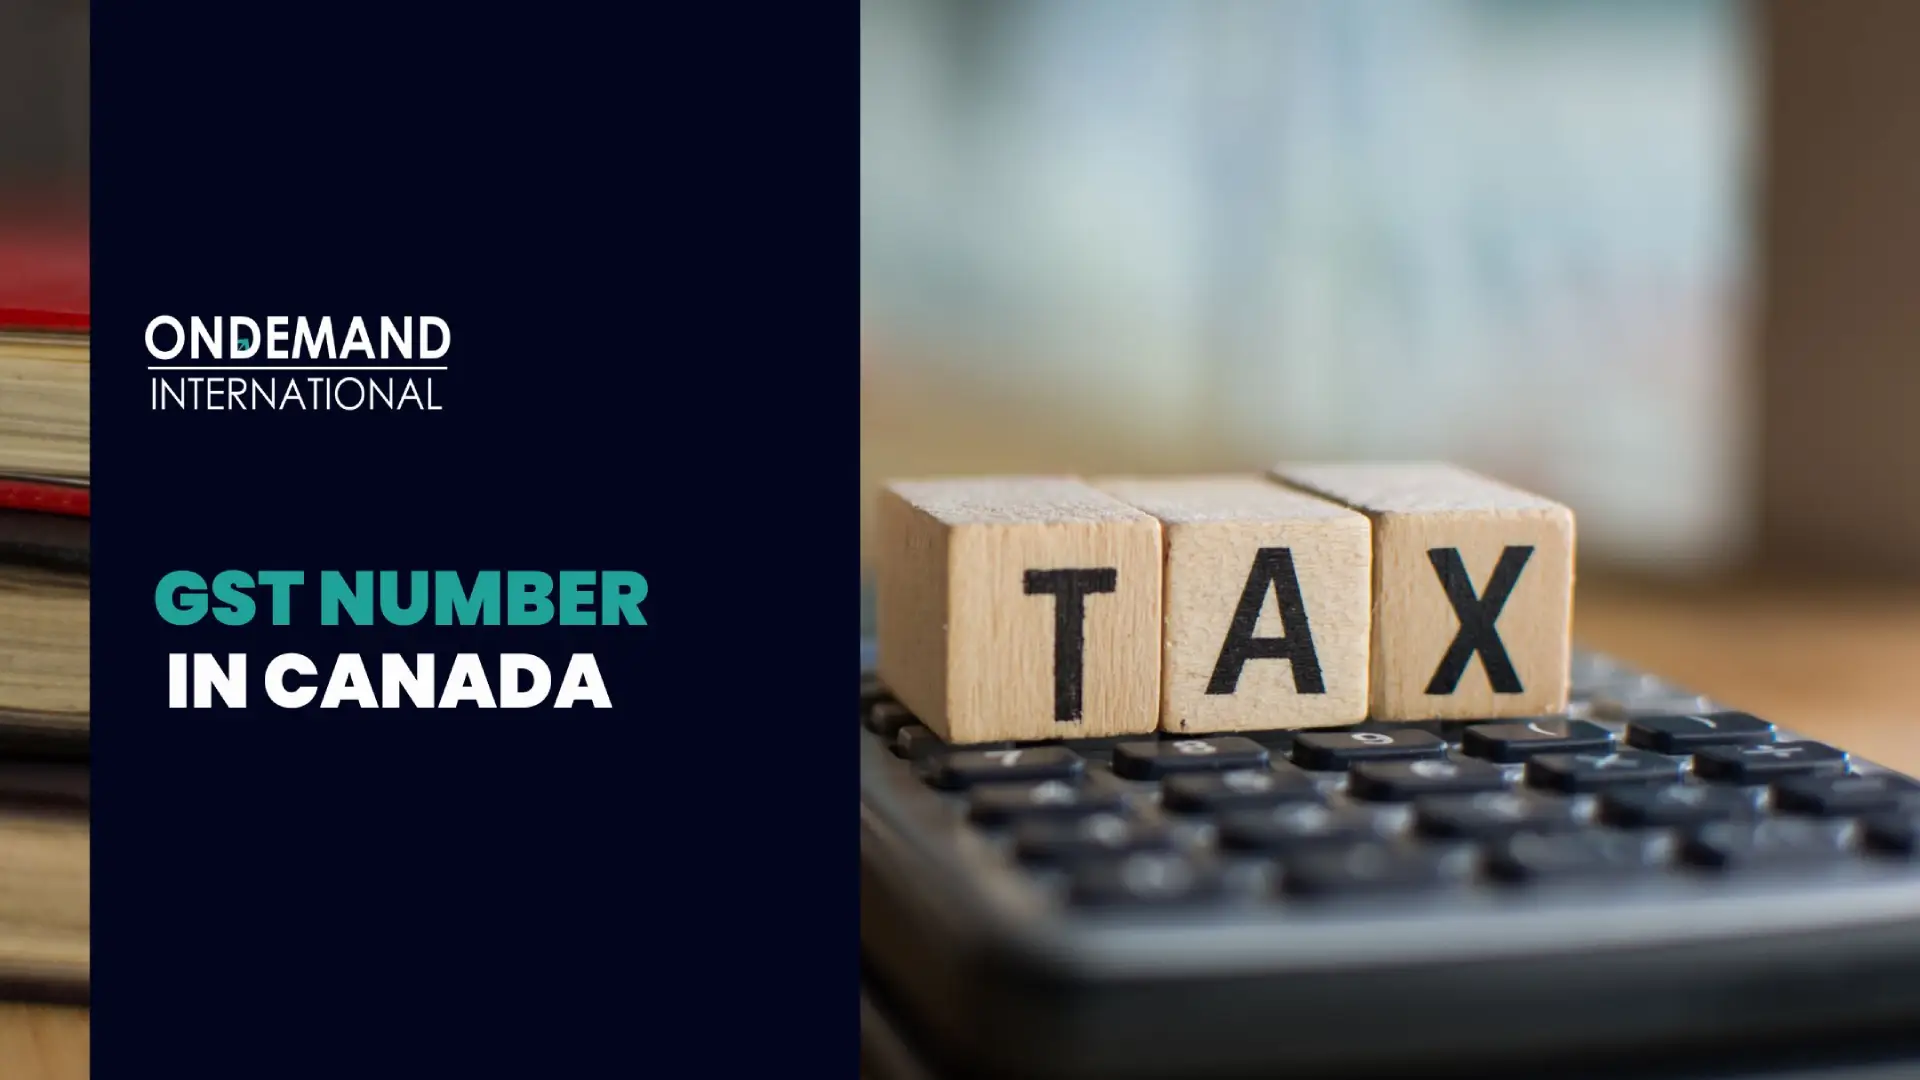 GST Number in Canada